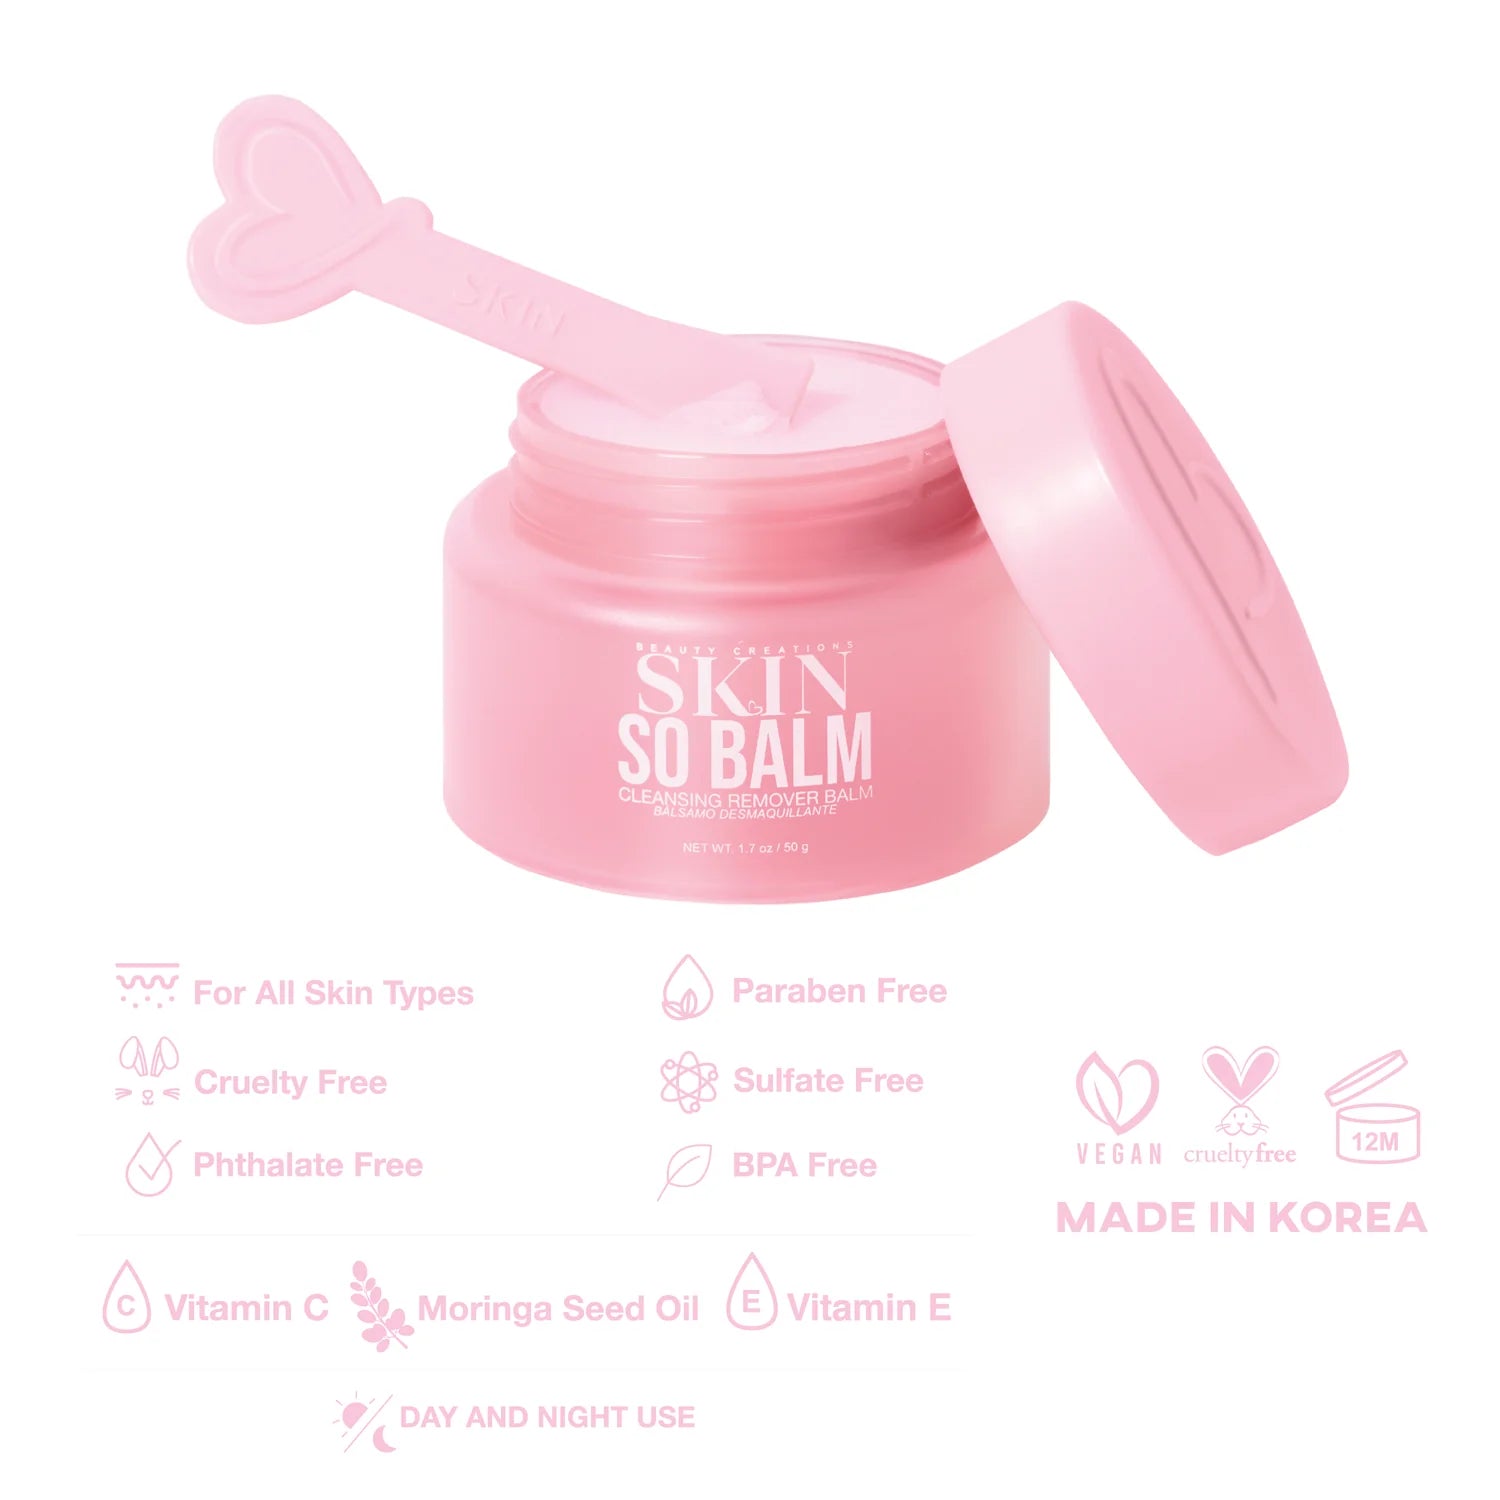 Beauty Creations - So Balm Cleansing Balm